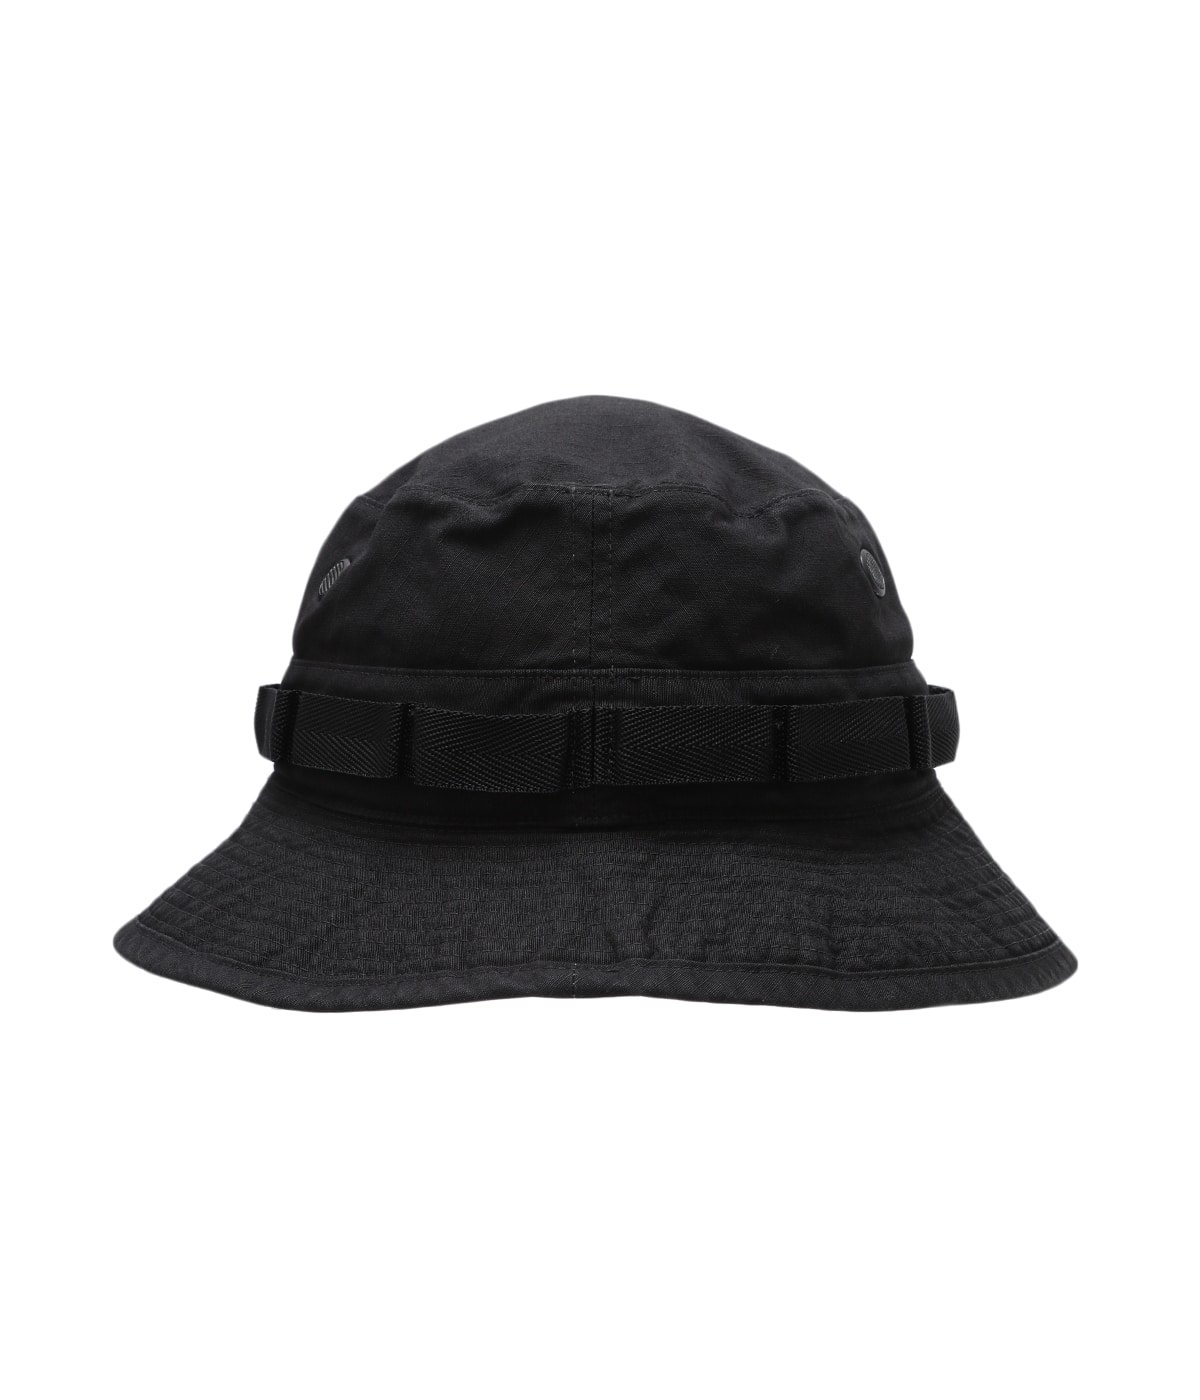 【ONLY ARK】別注 US ARMY JUNGLE HAT